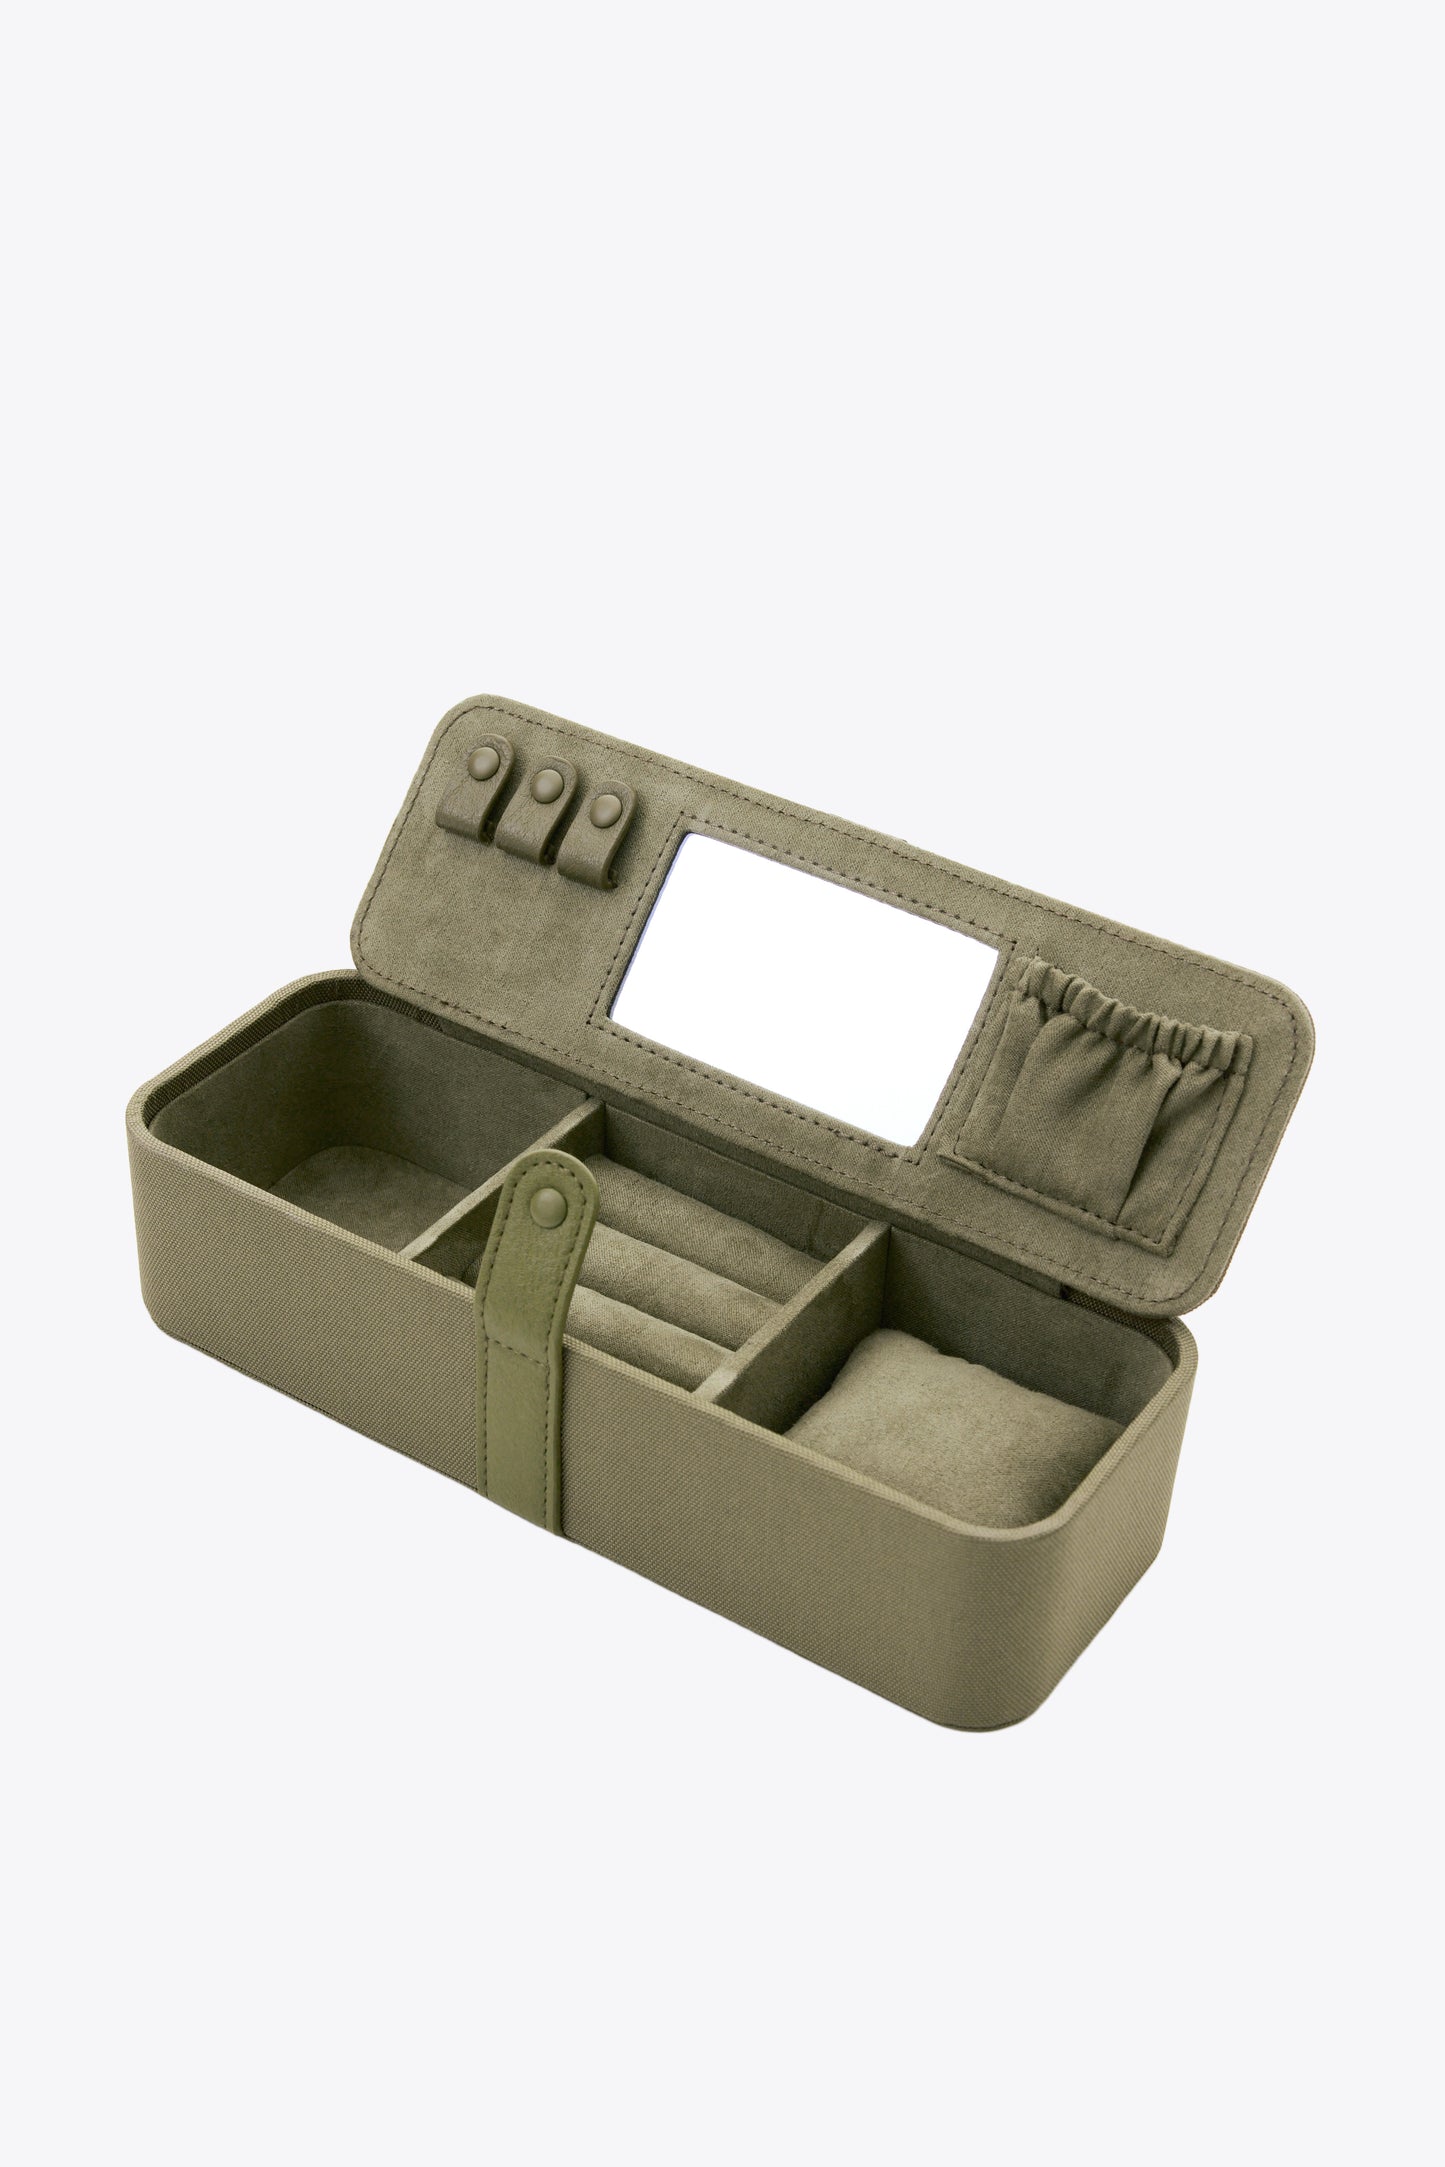 The Jewelry Case in Olive